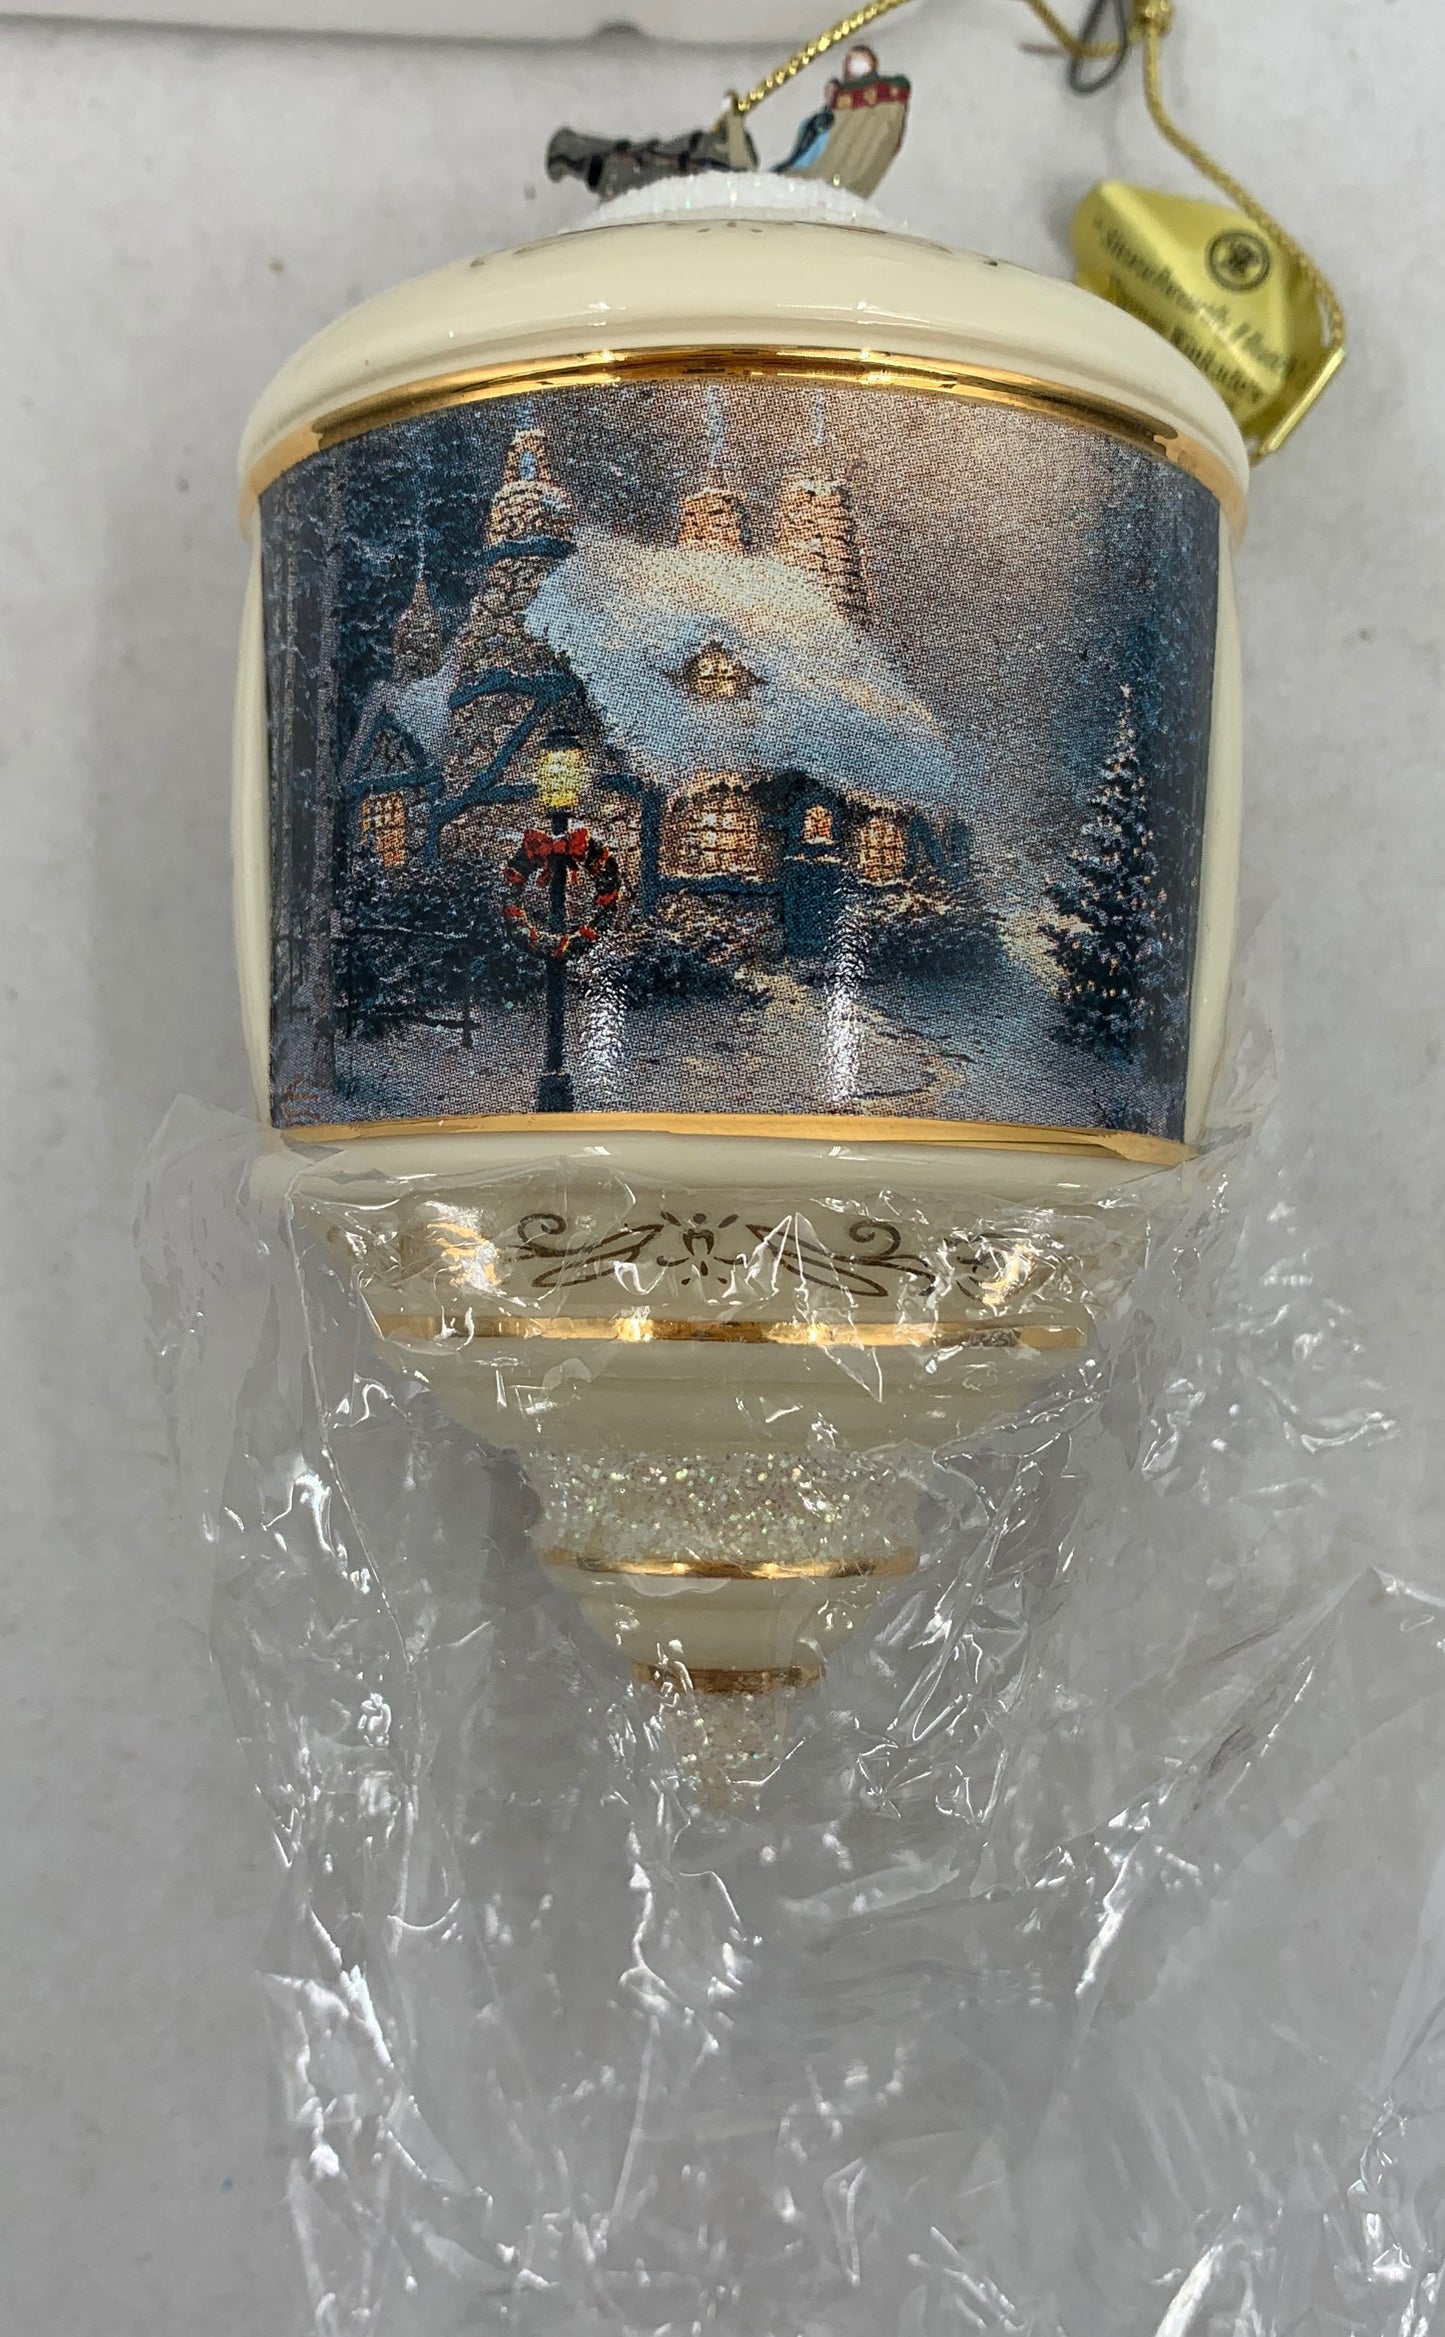 The Bradford Editions Thomas Kinkade Heirloom Glass Collection 3rd Issue #68413